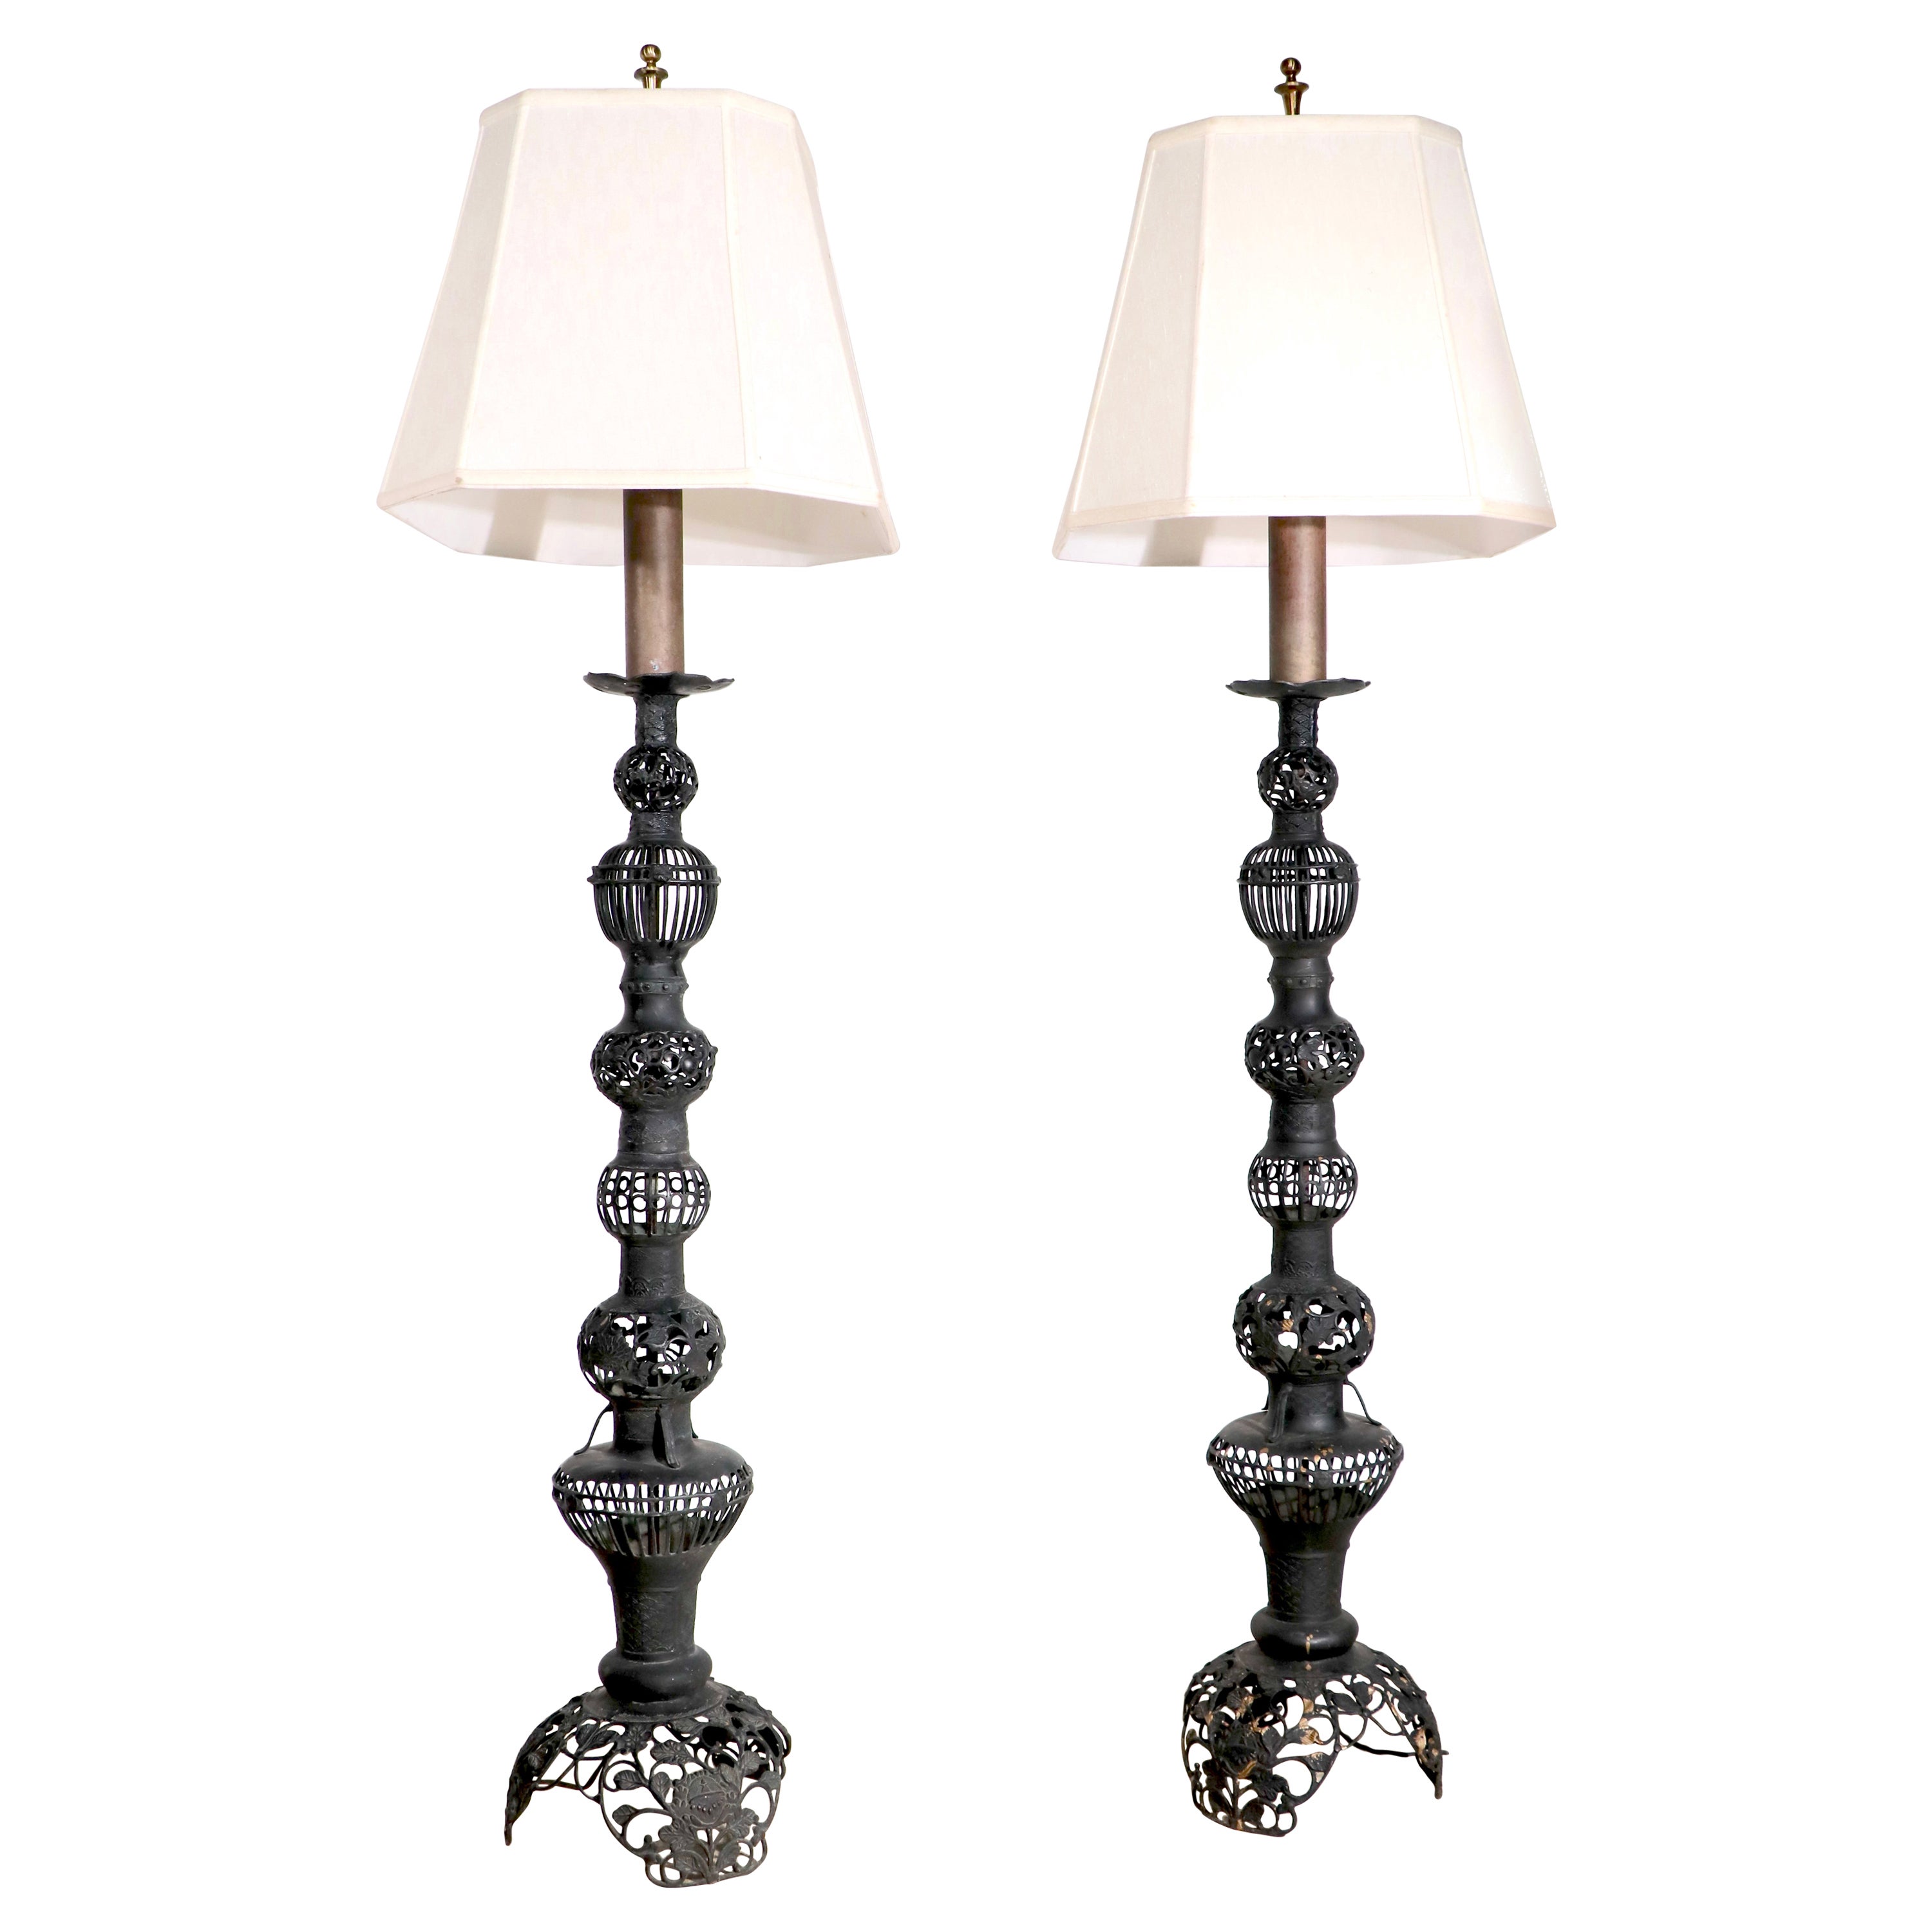 Pr. Decorative Vintage Pierced Metal Floor Lamps Made in India Ca. 1970's For Sale